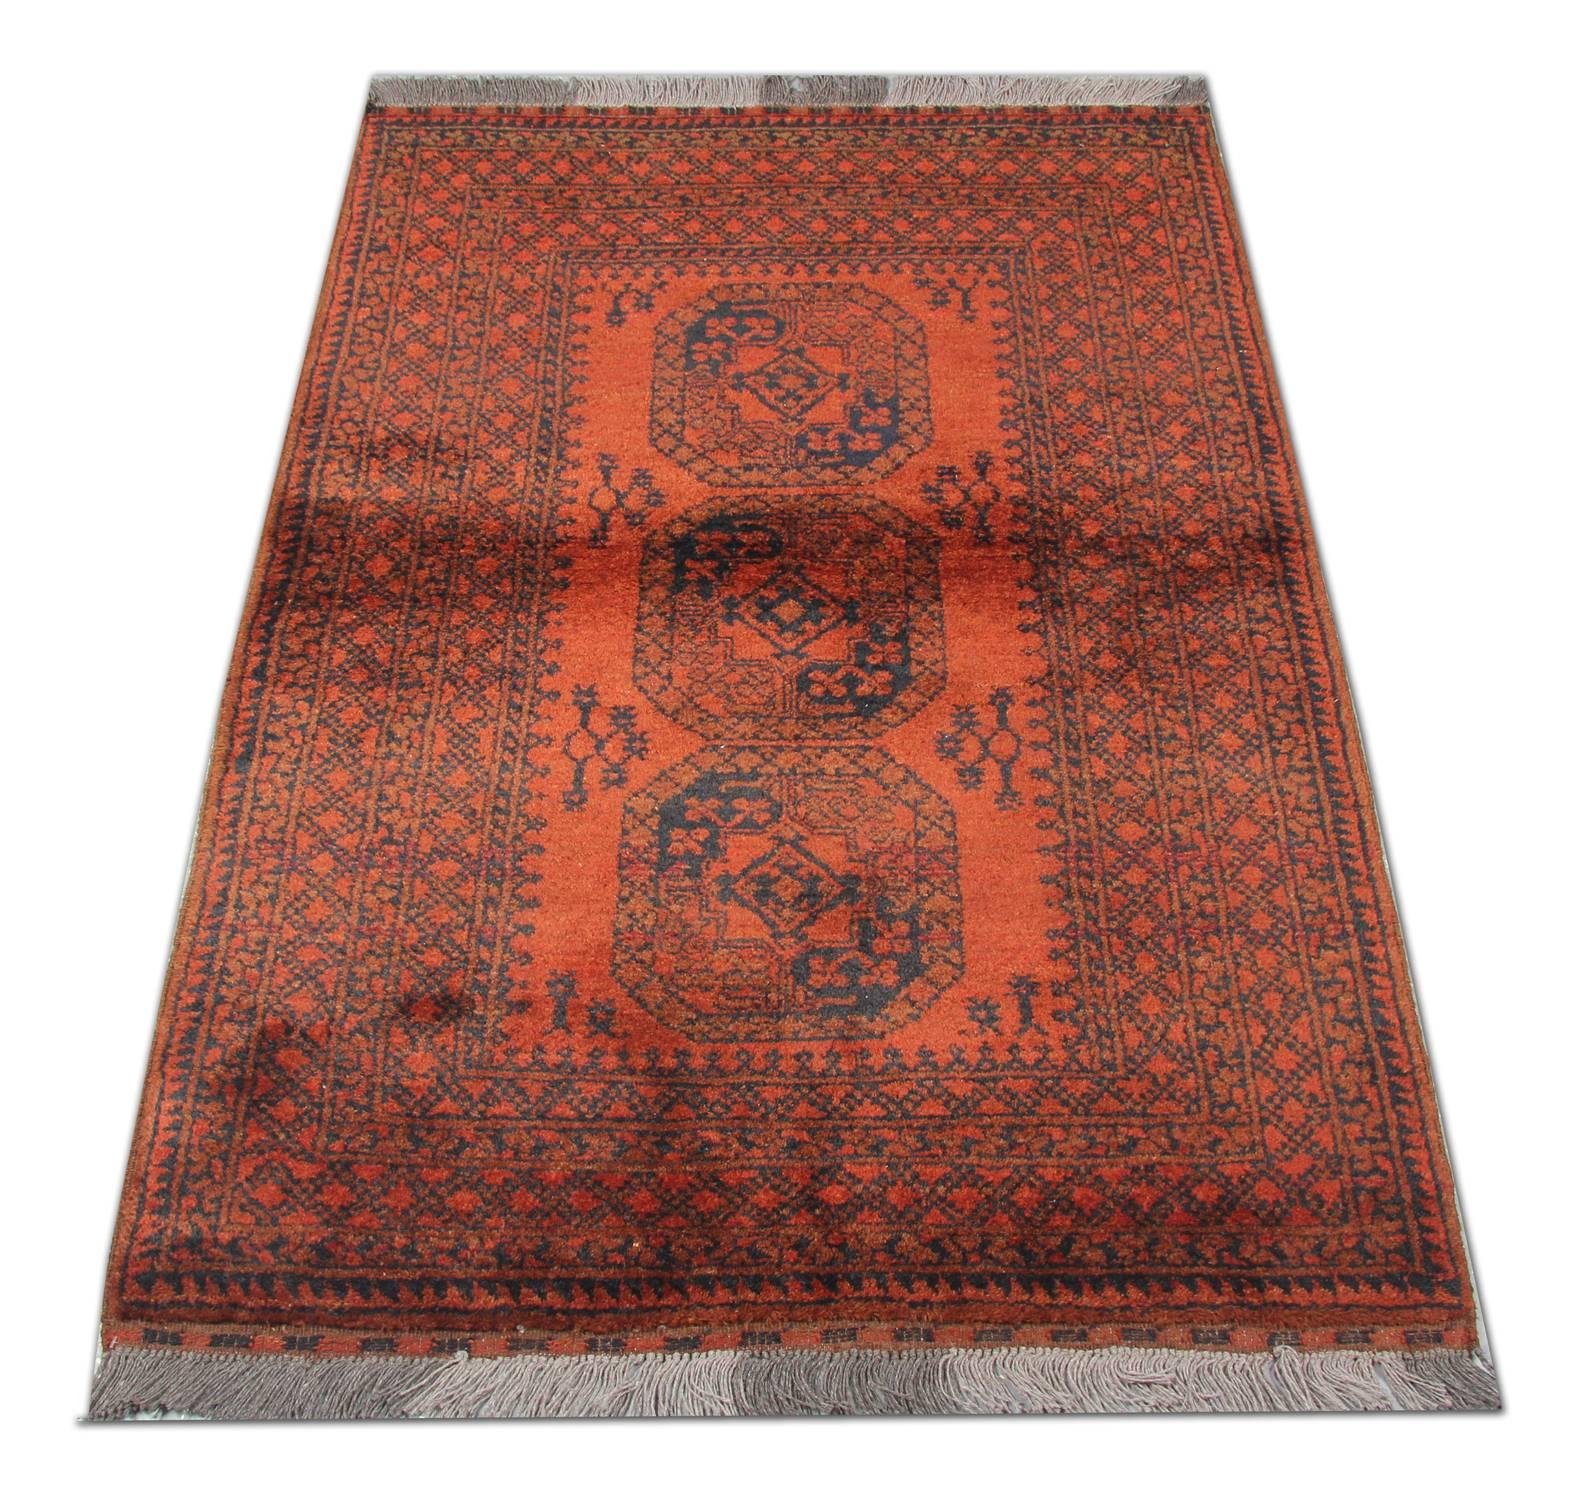 This traditional afghan carpet area rug was woven by hand in the 1960s. The central design features three grand medallions, woven in deep blue on a rich red background. This is then gramed by a highly-decorative repeat pattern border.
Suitable for